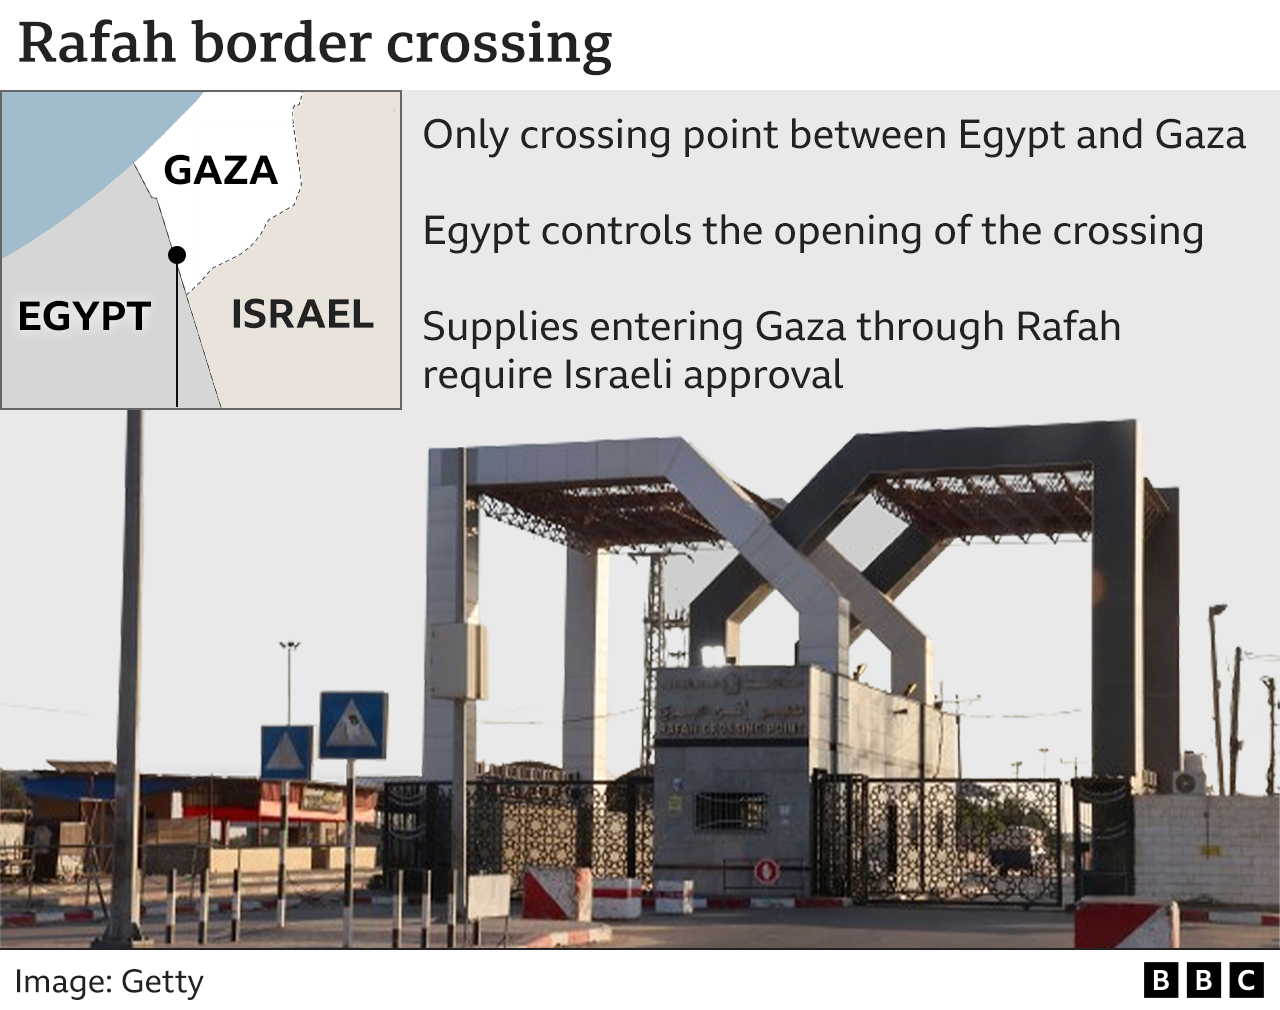 Rafah border crossing - the only crossing point between Egypt and Gaza